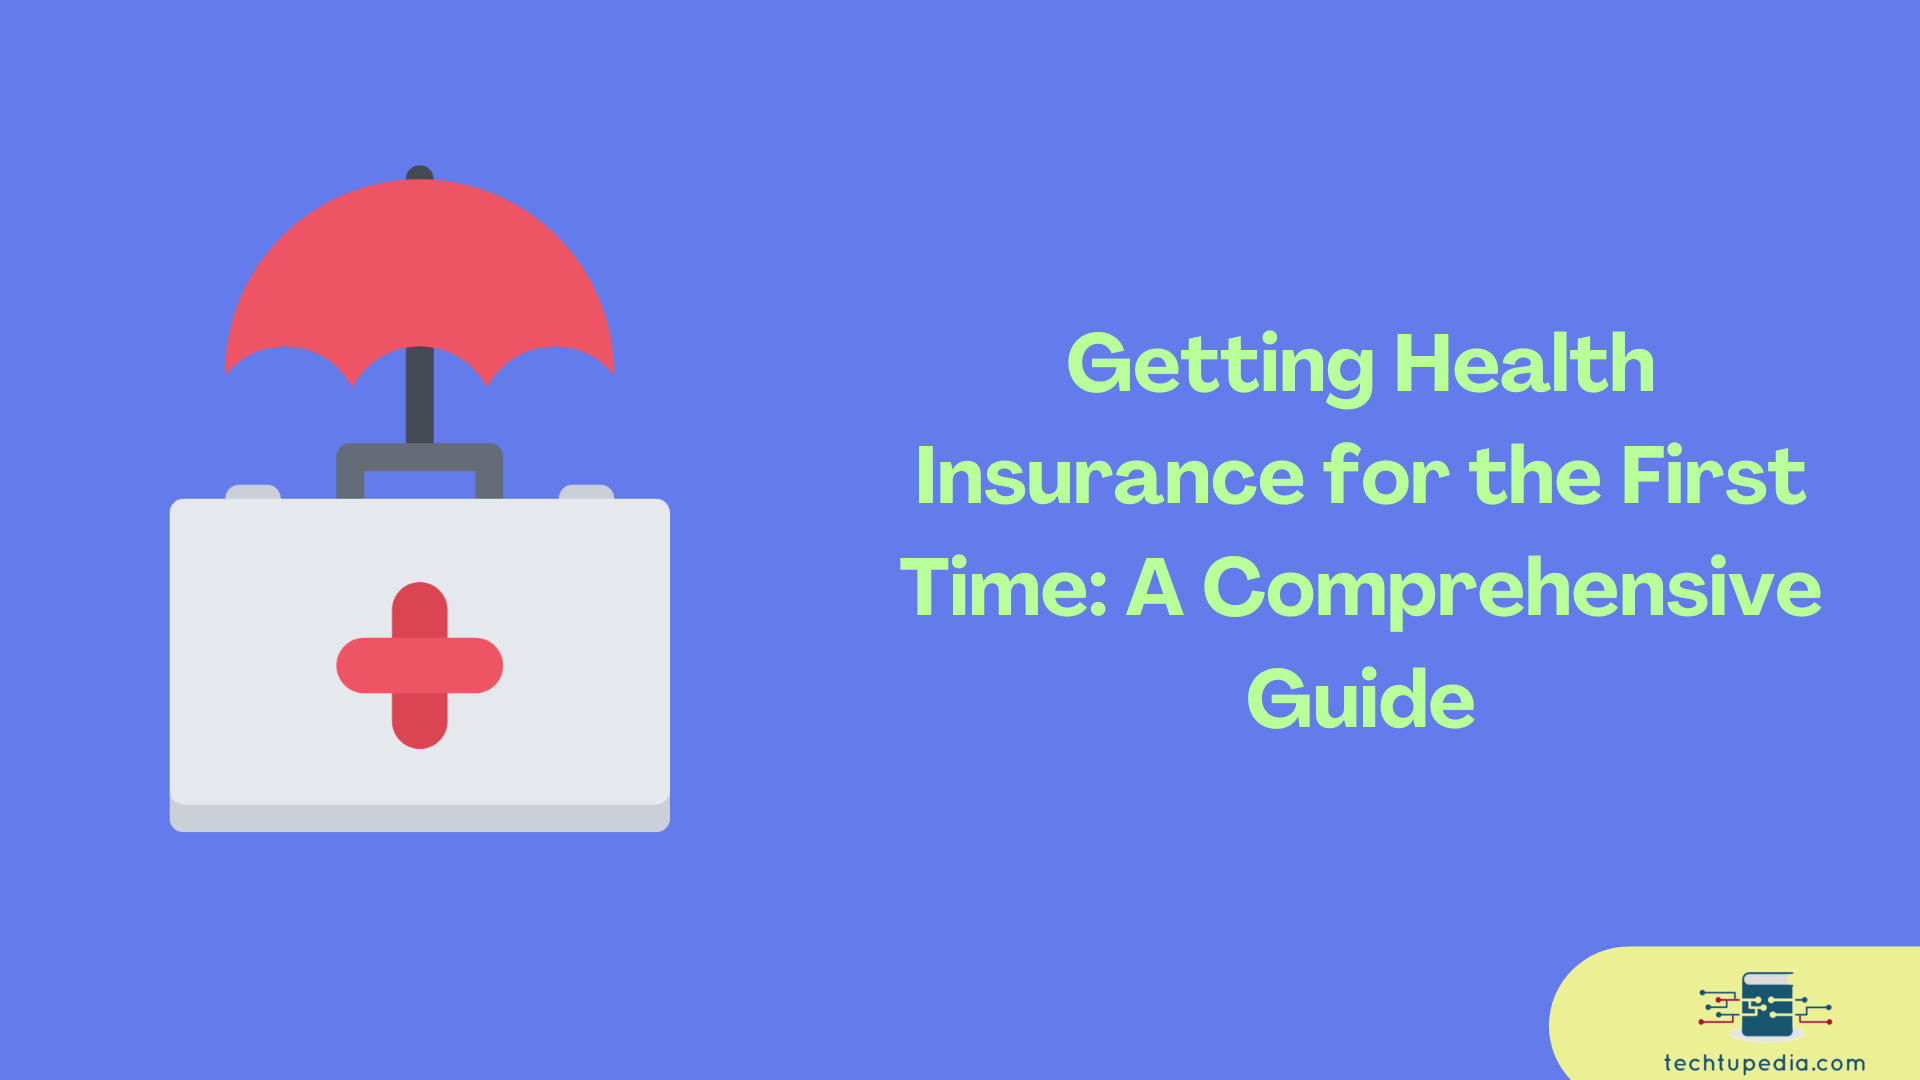 Getting Health Insurance for the First Time: A Comprehensive Guide